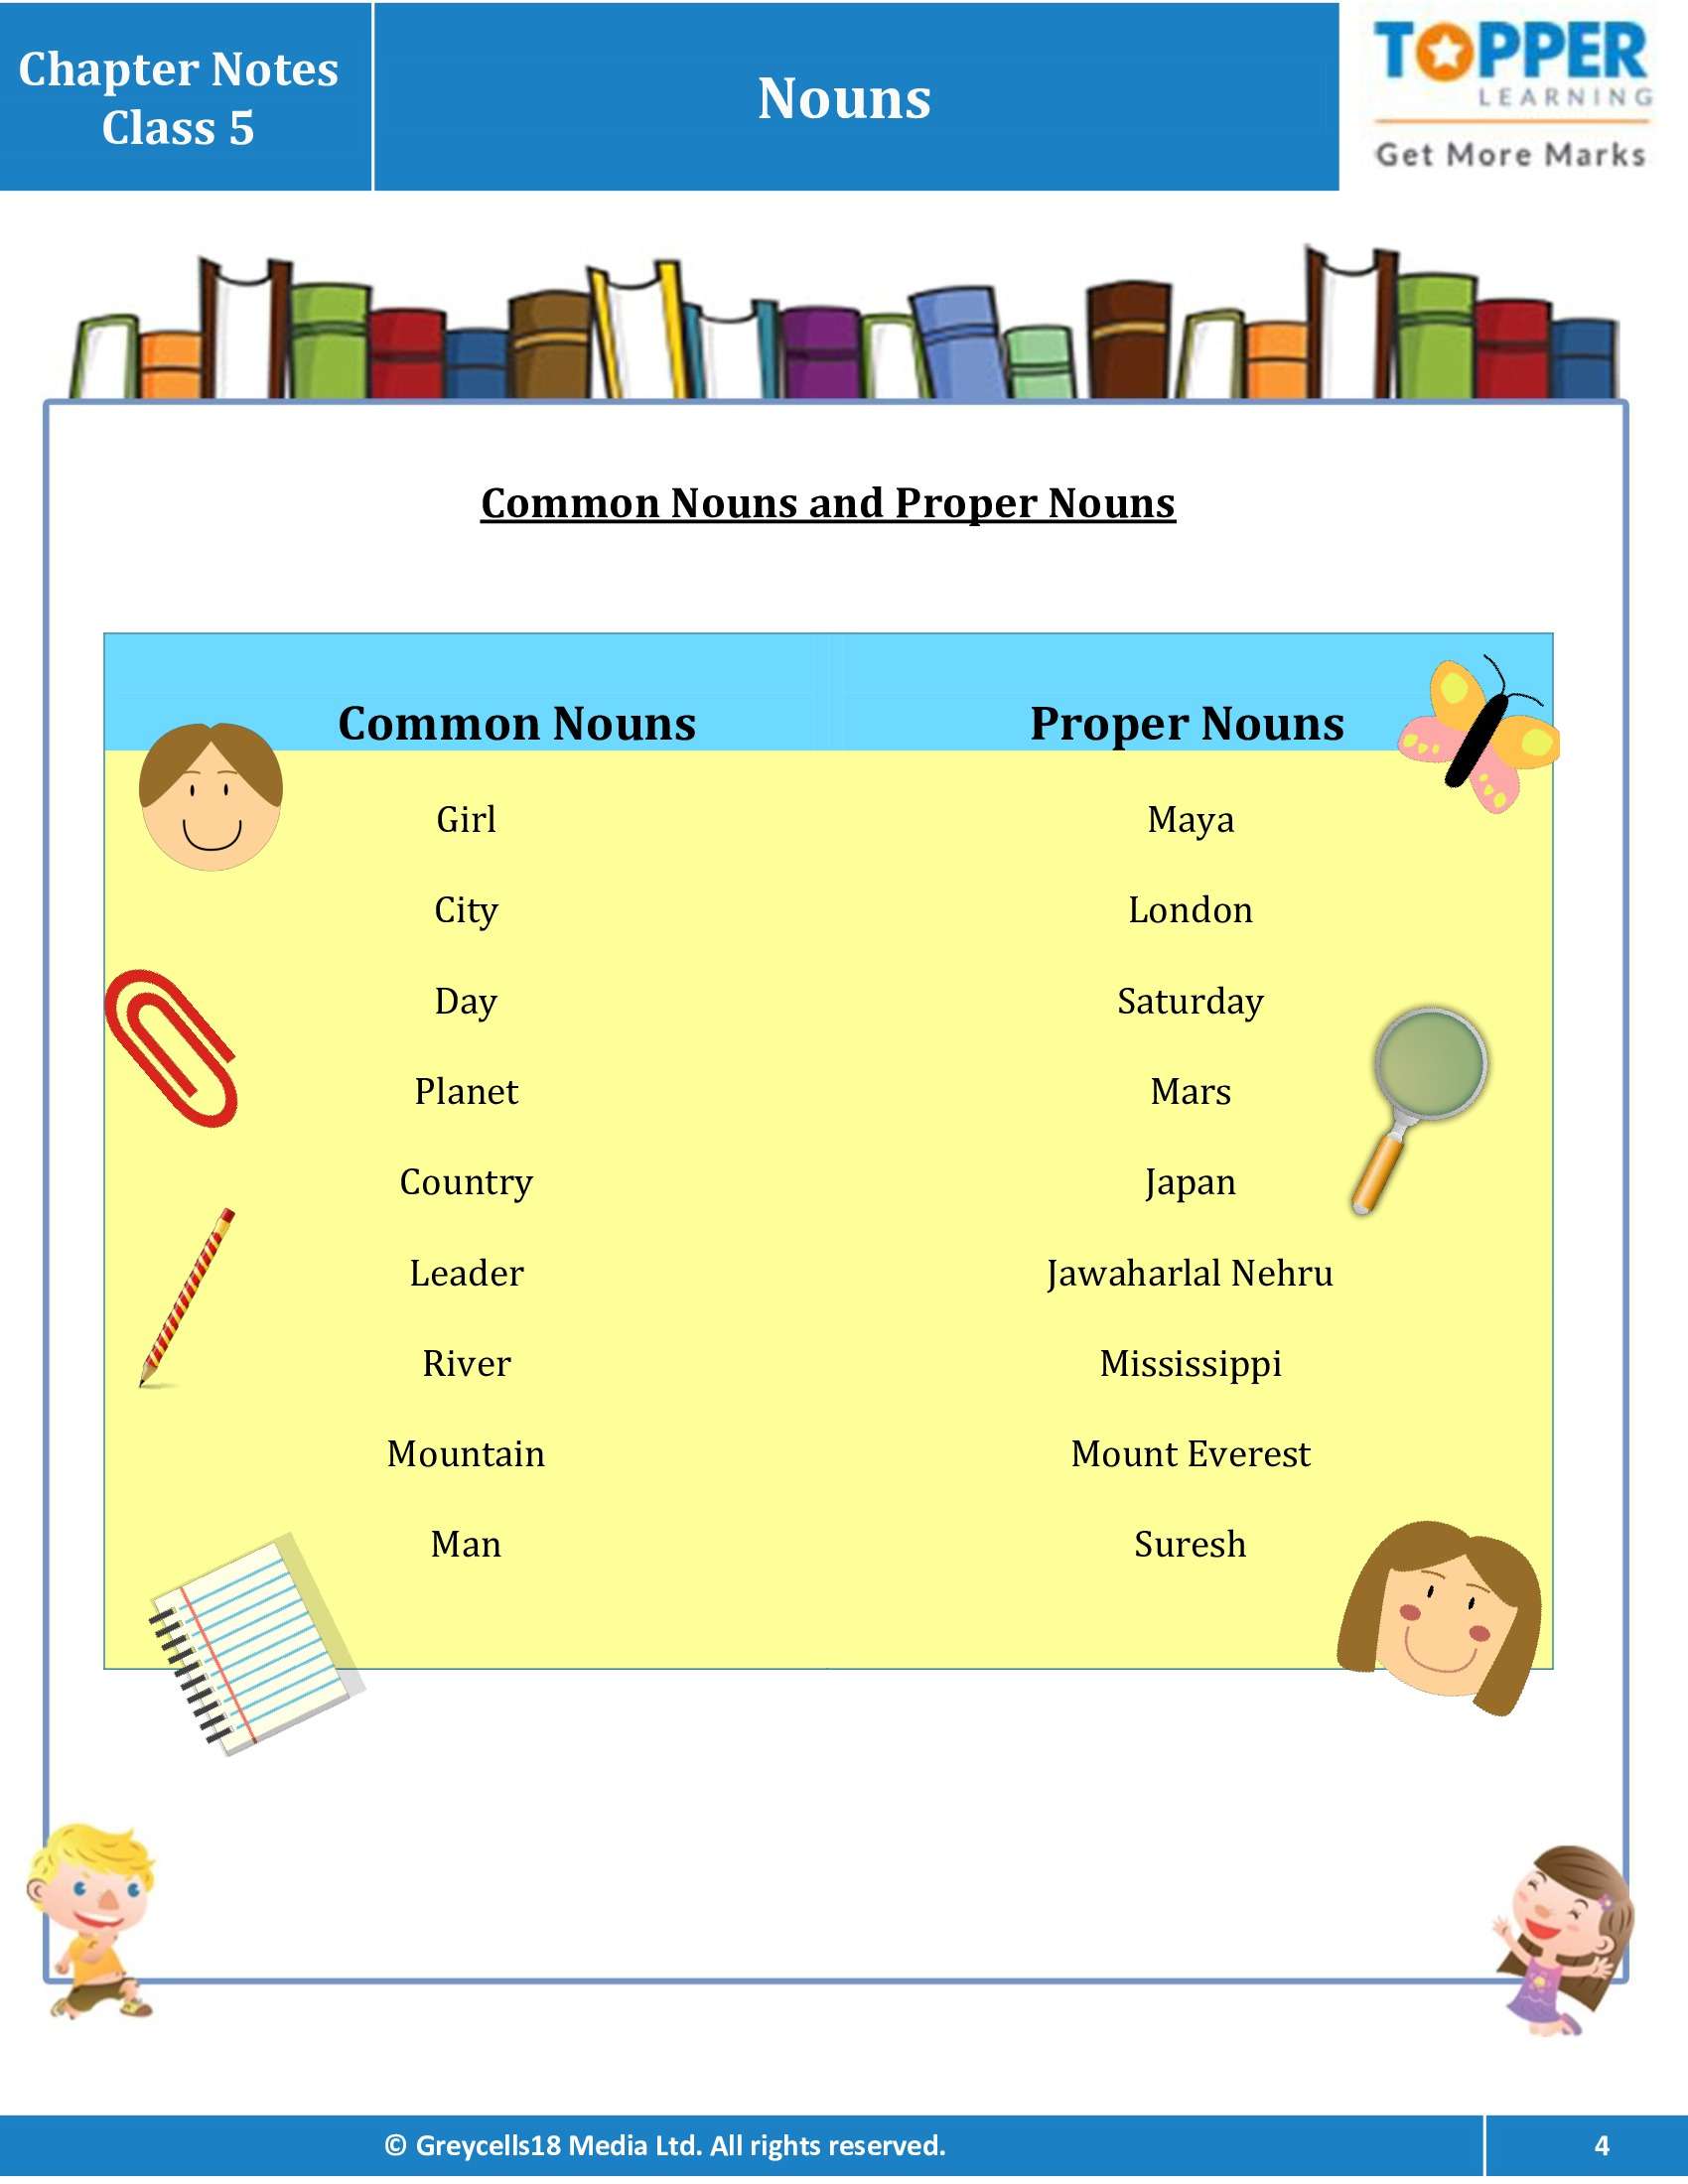 chapter-notes-for-class-5-junior-english-nouns-topperlearning